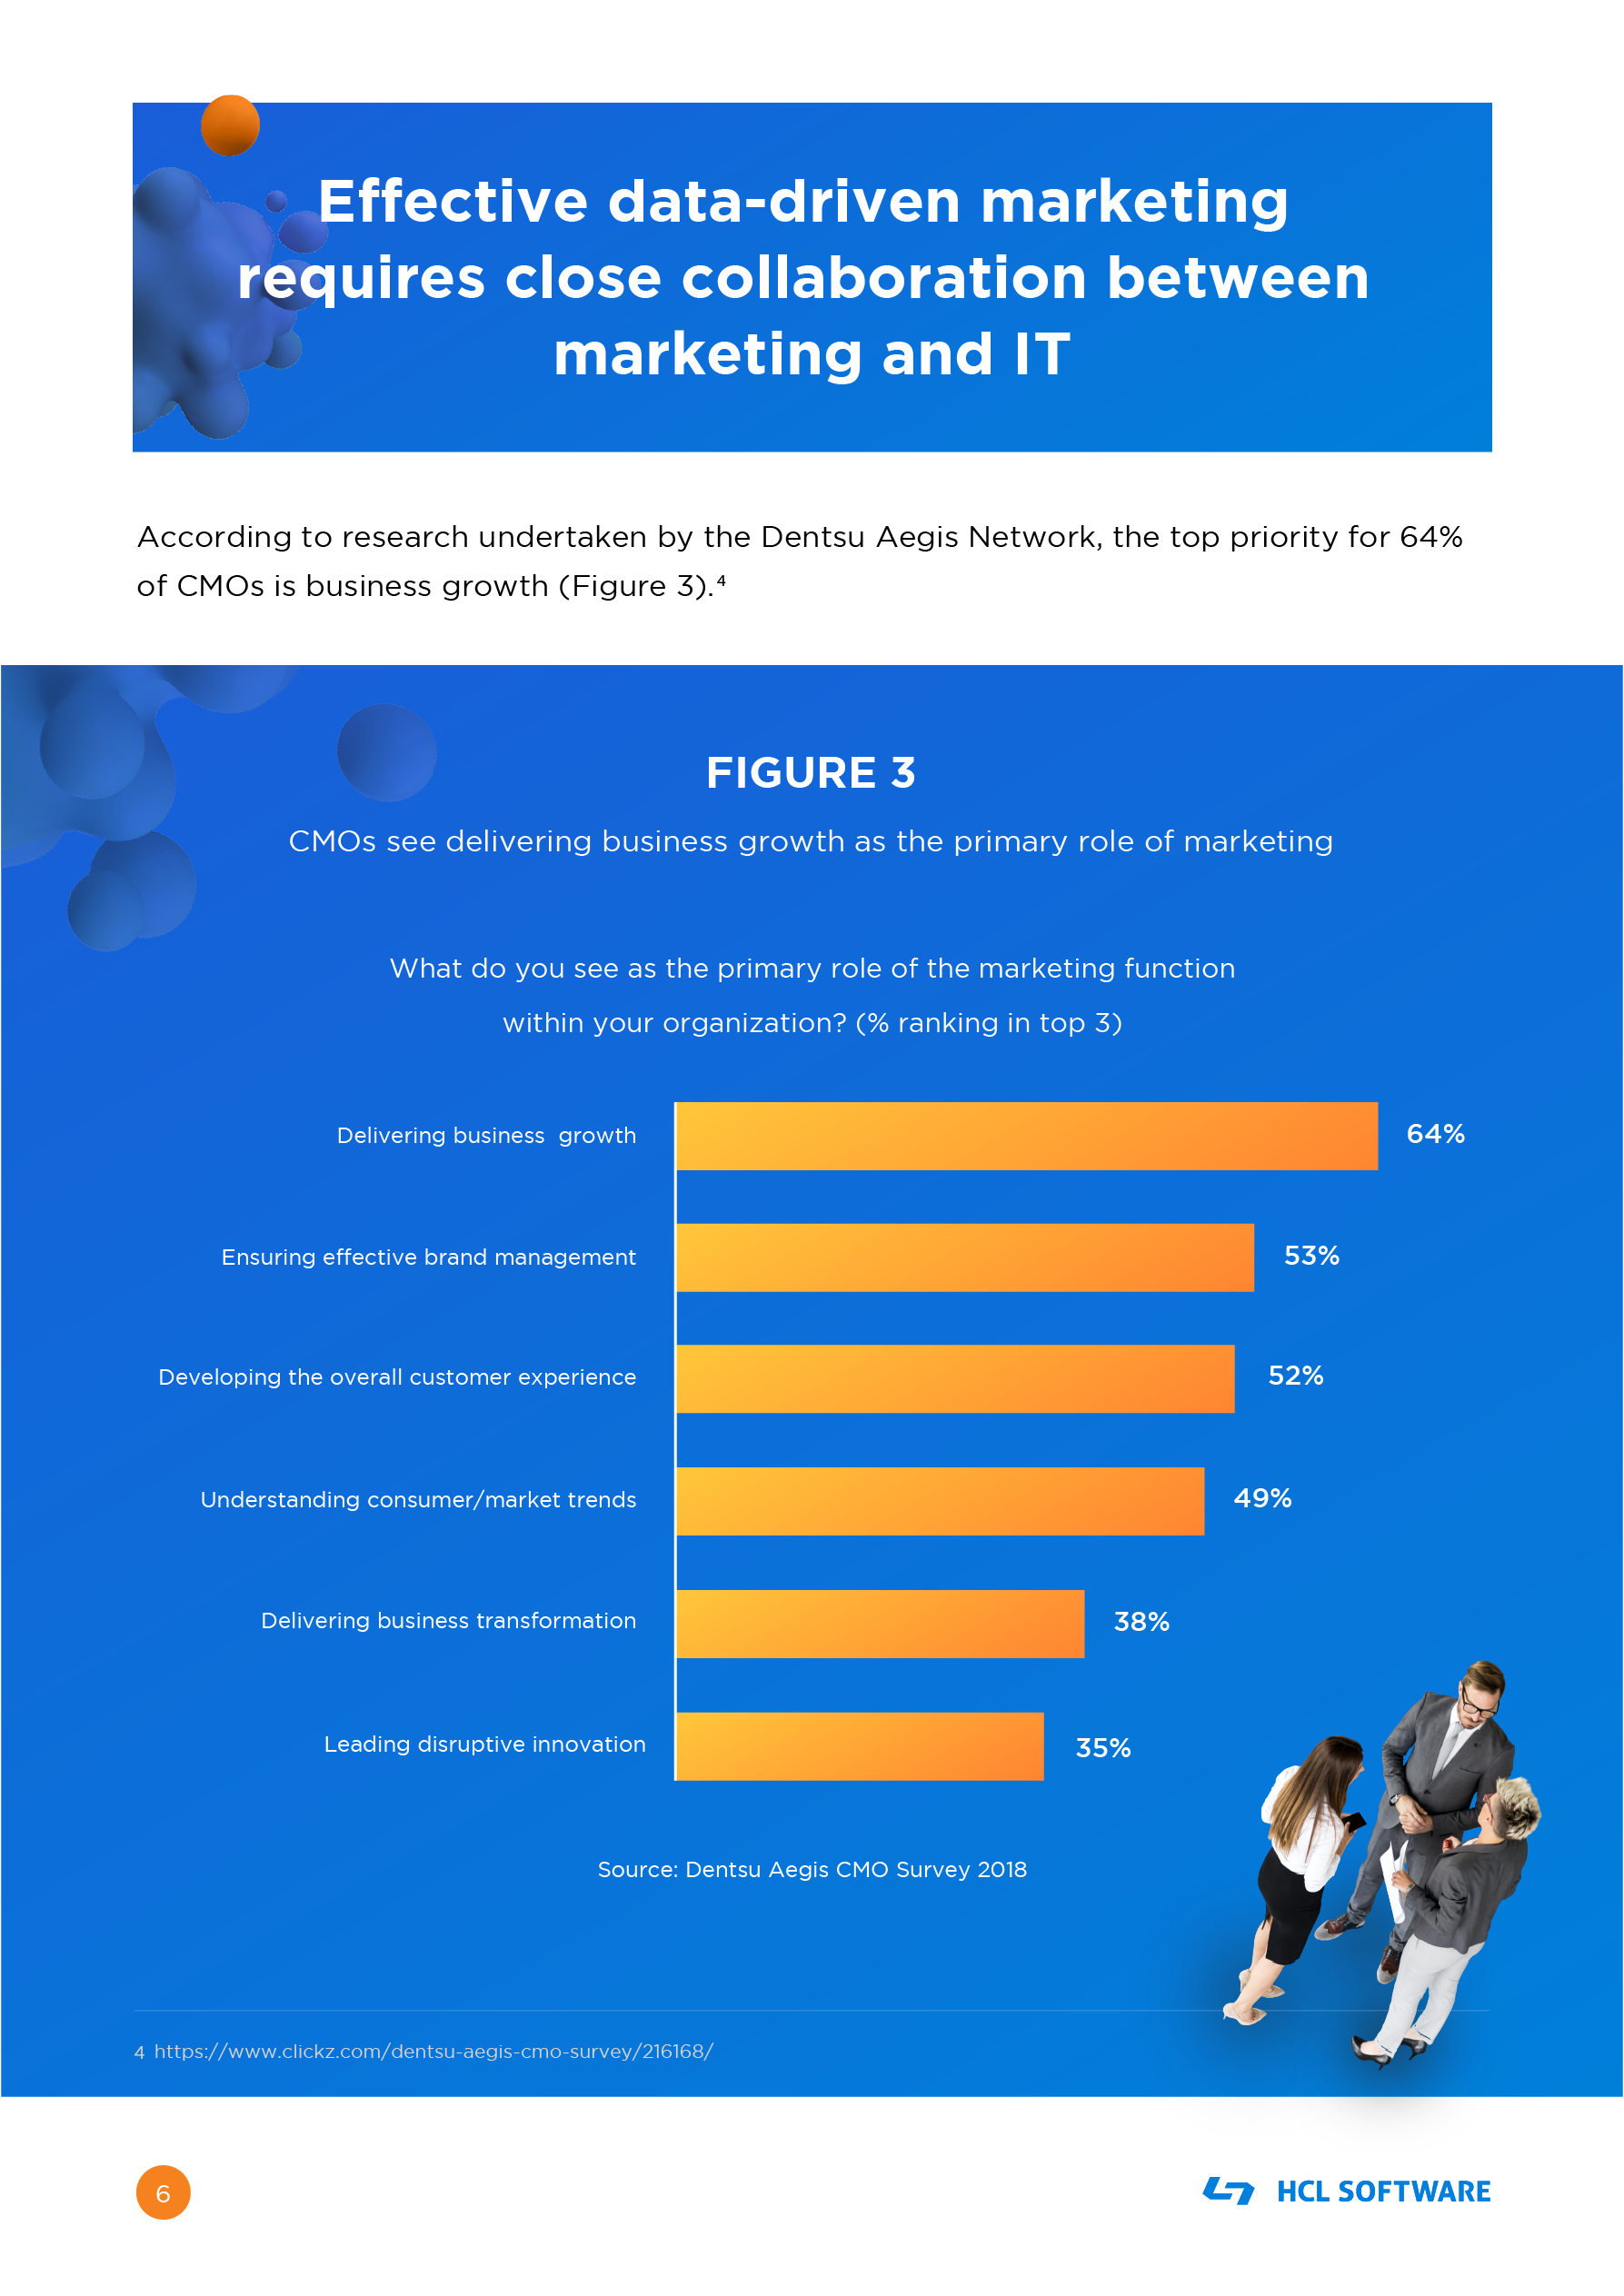 CMOs see delivering business growth as the primary role of marketing